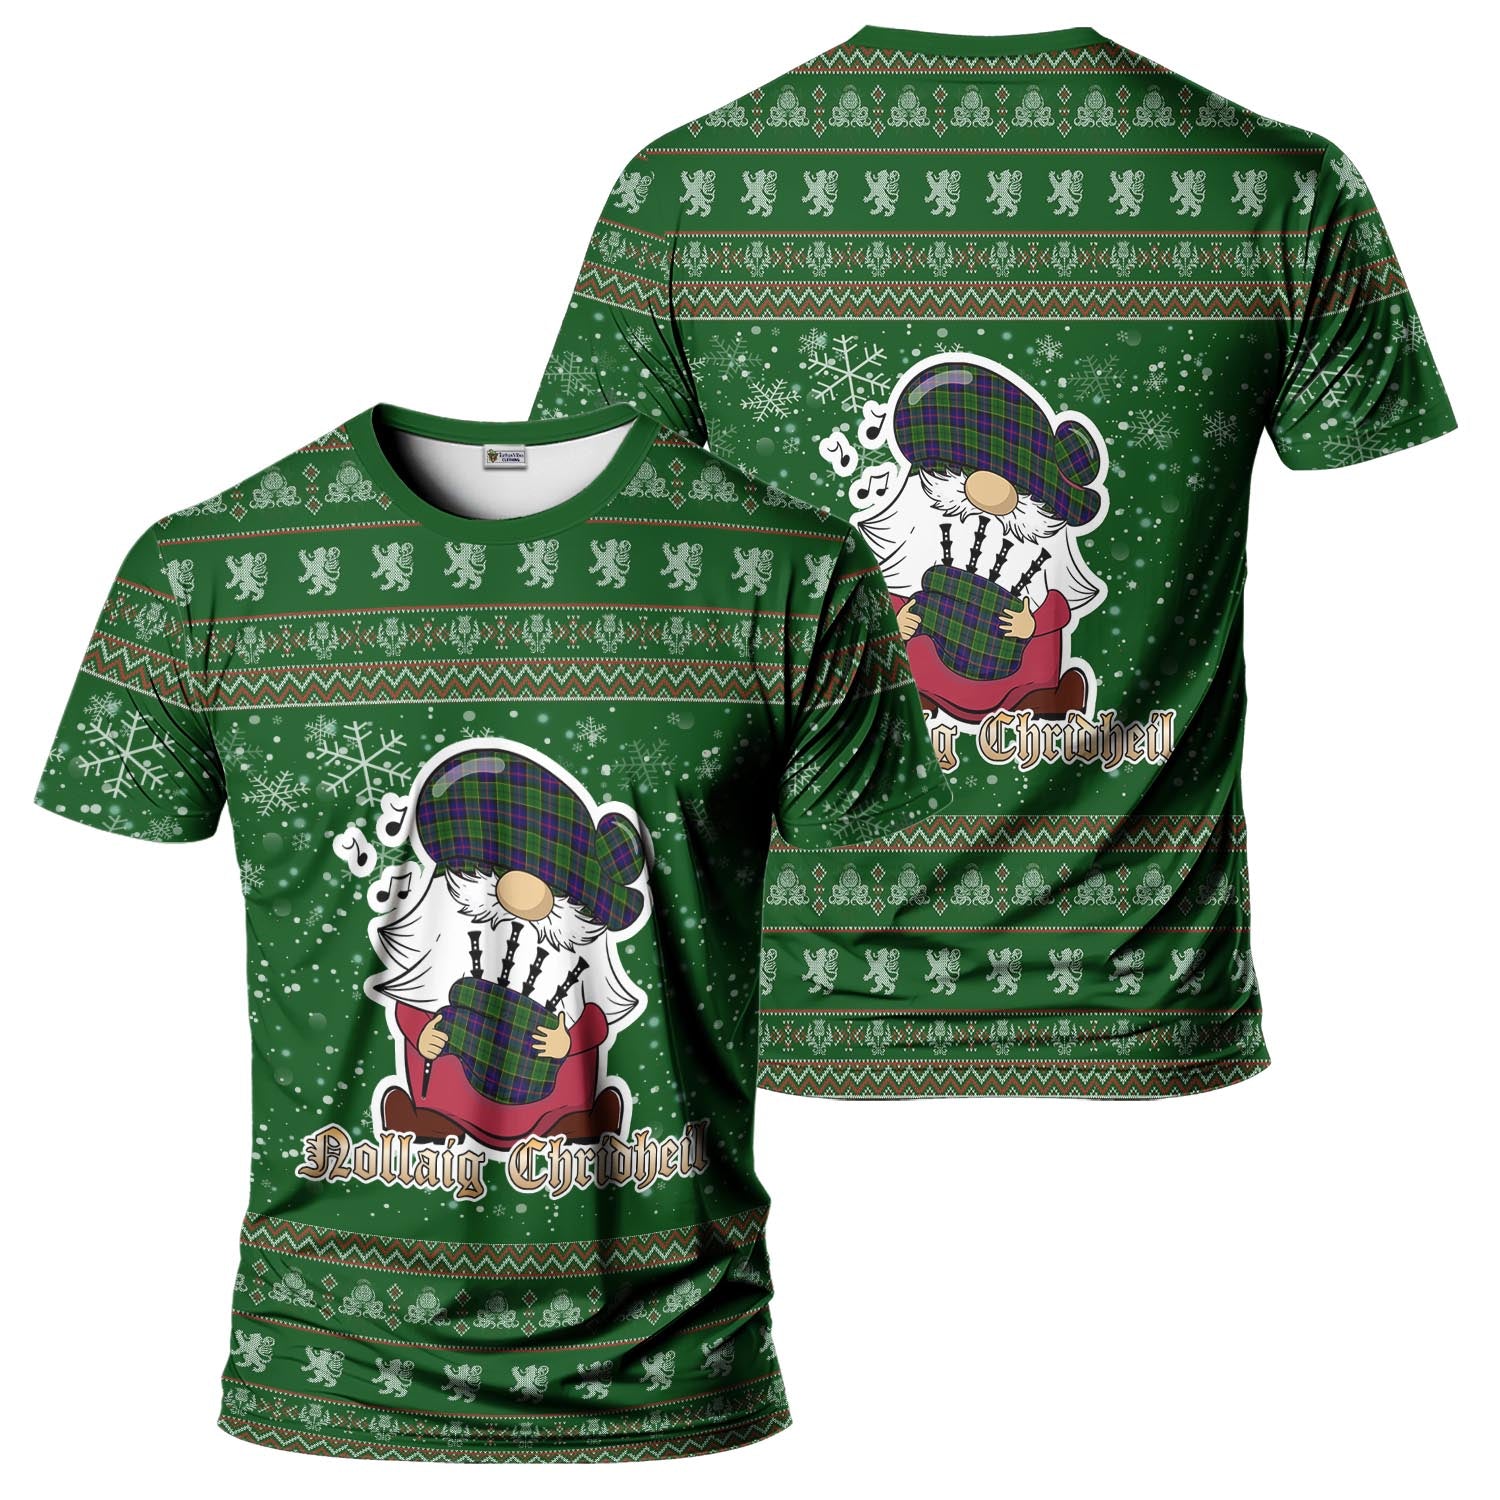 Forsyth Modern Clan Christmas Family T-Shirt with Funny Gnome Playing Bagpipes Men's Shirt Green - Tartanvibesclothing